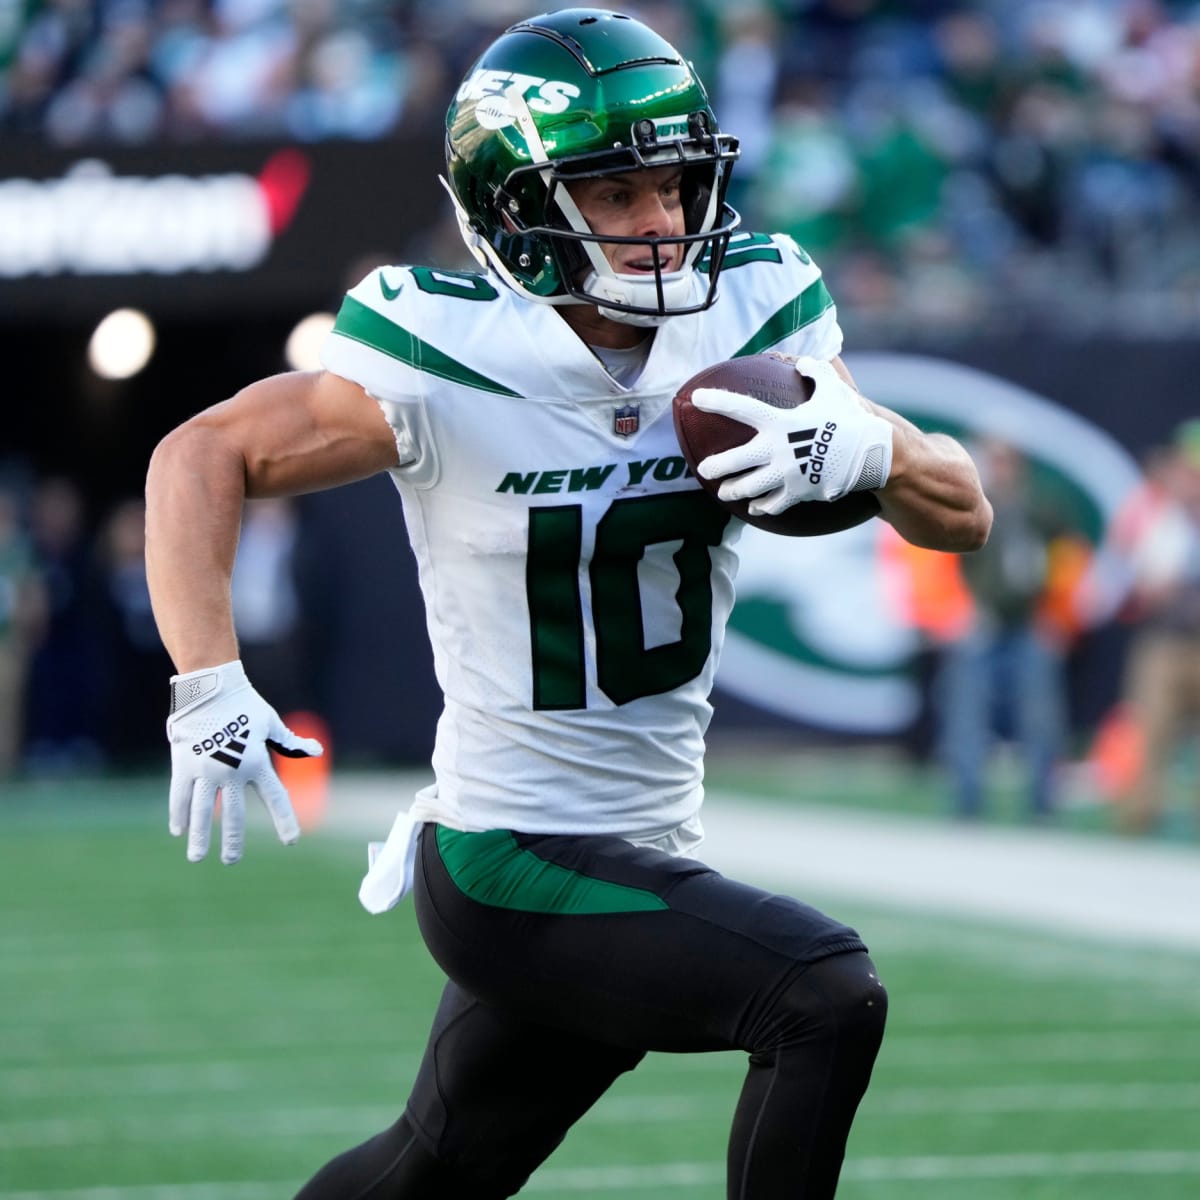 Why Hasn't New York Jets WR Braxton Berrios Been More Involved